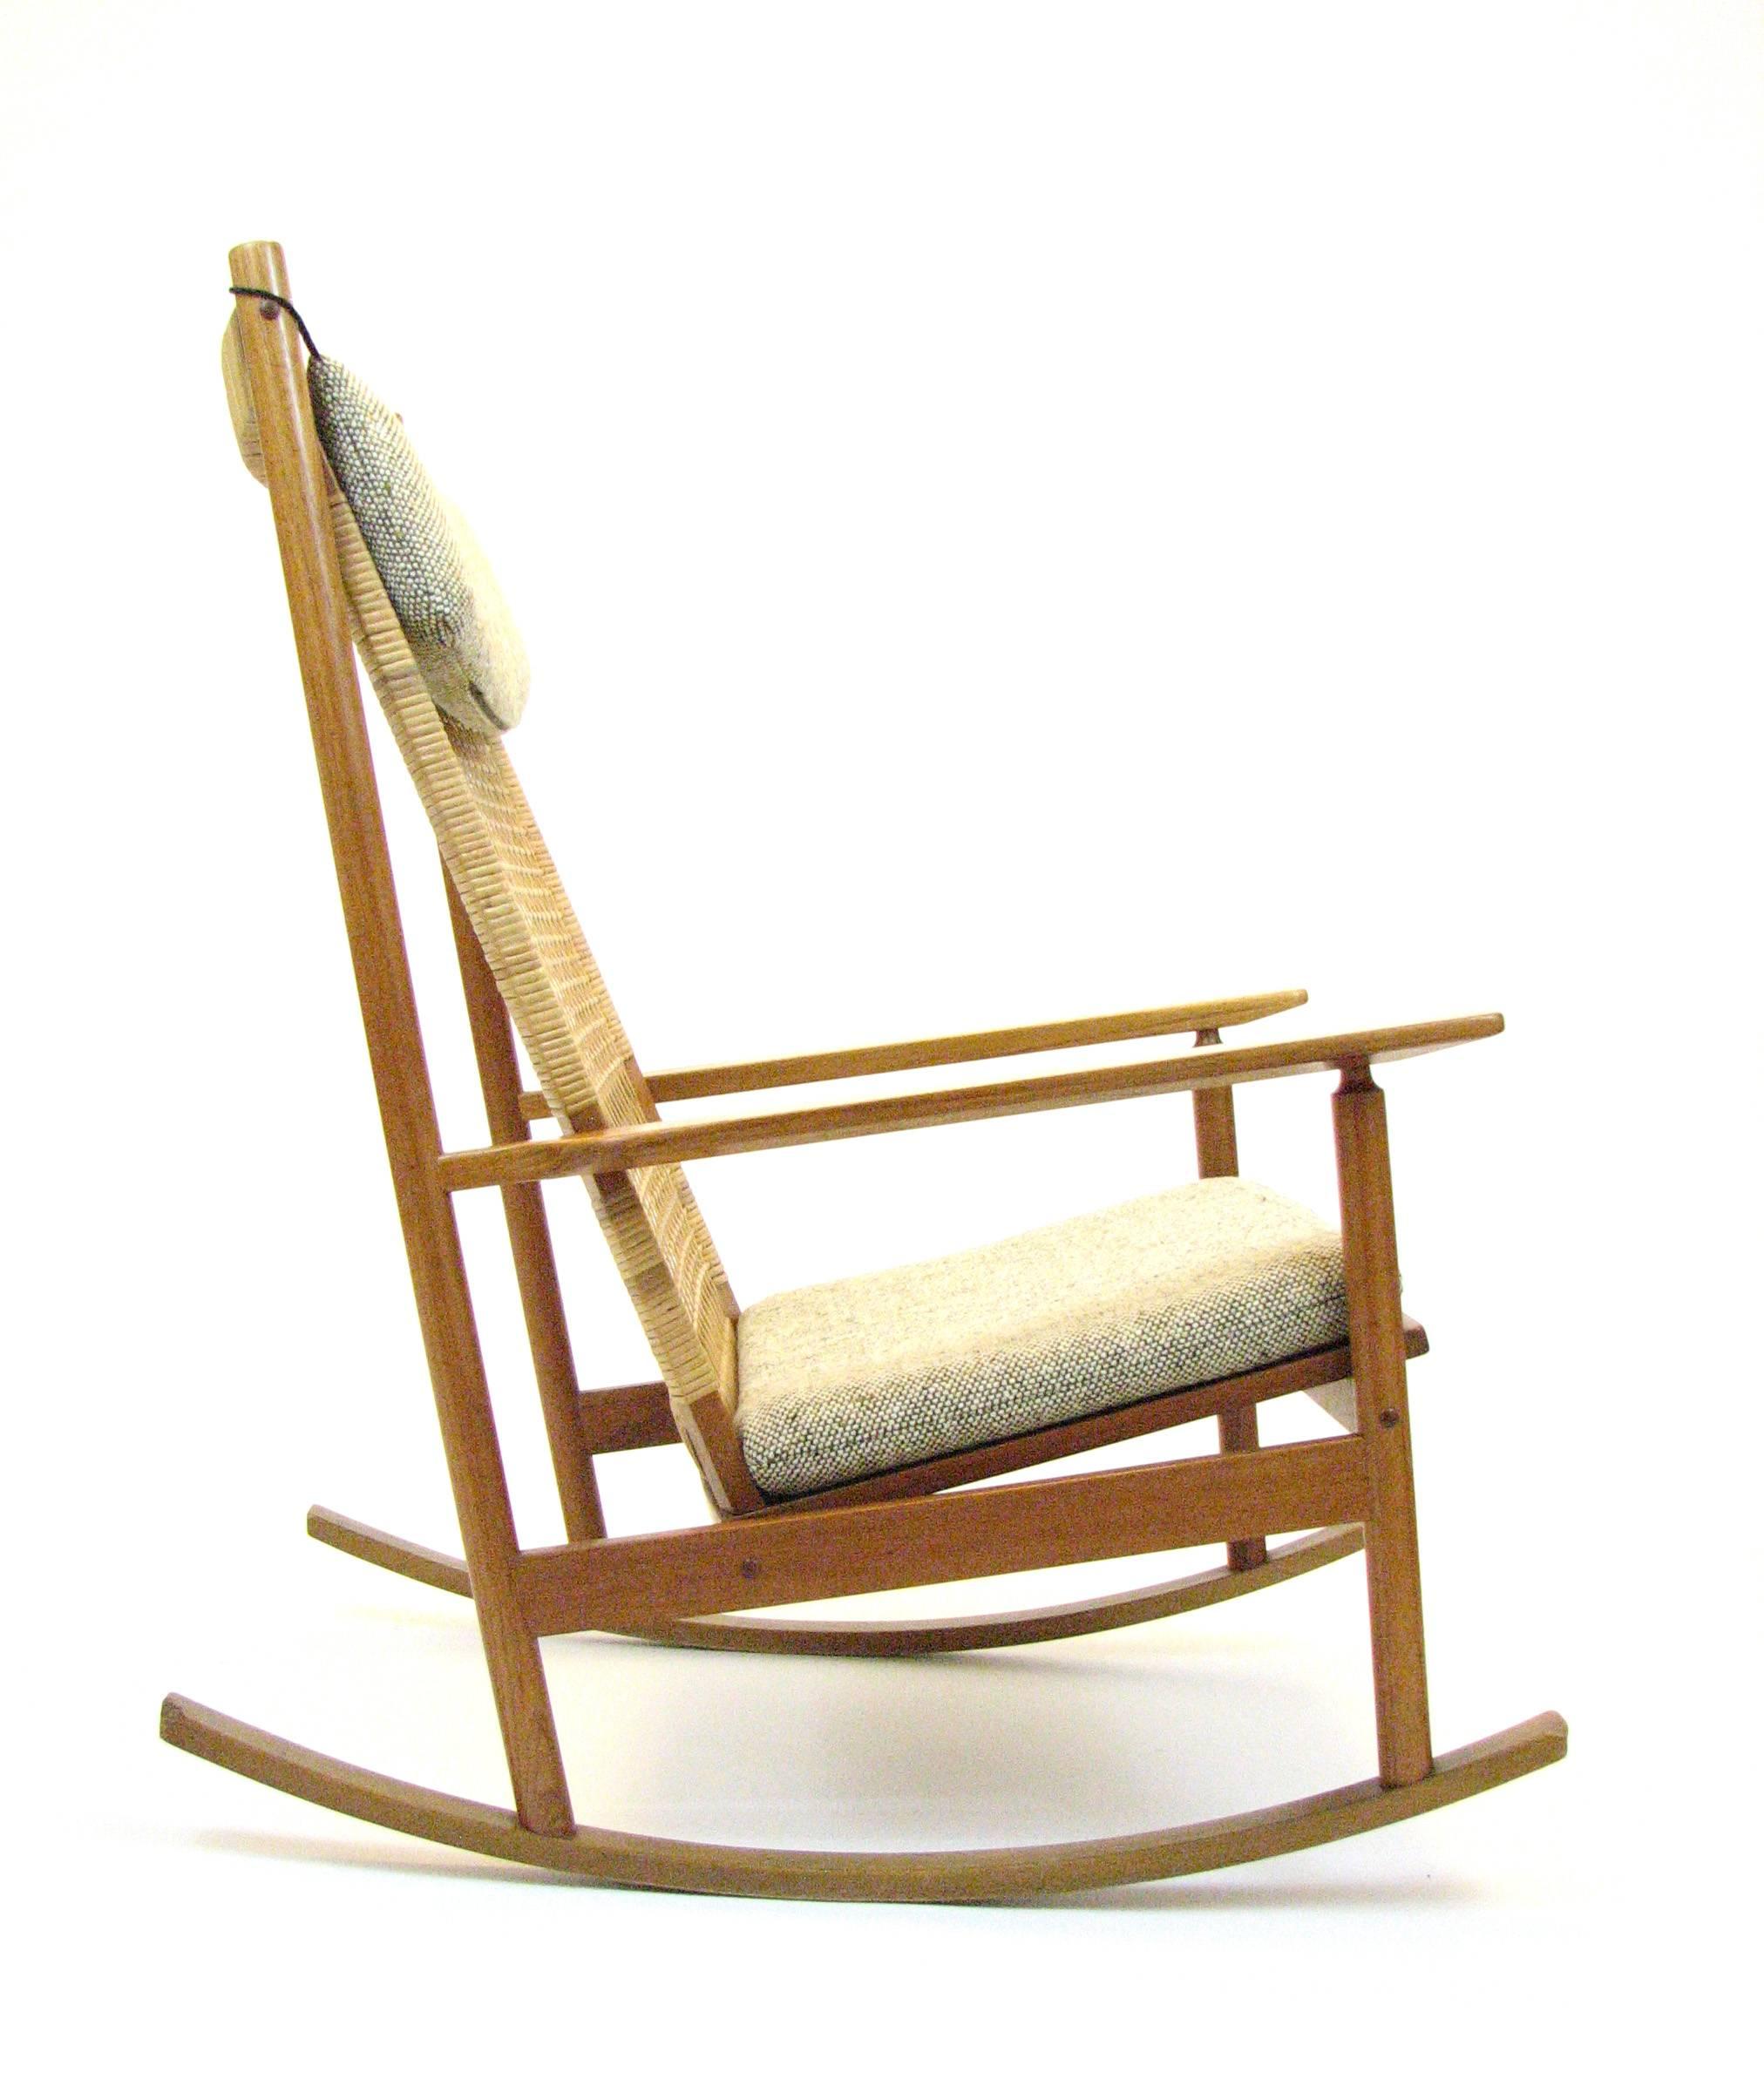 A stunning teak and woven cane rocking chair by Hans Olsen for Brdr Juul-Kristensen. Model 532A, circa 1961.

Overall beautiful condition and structurally sound. All of the caning is intact. The end of one rail has been lightly damaged, as